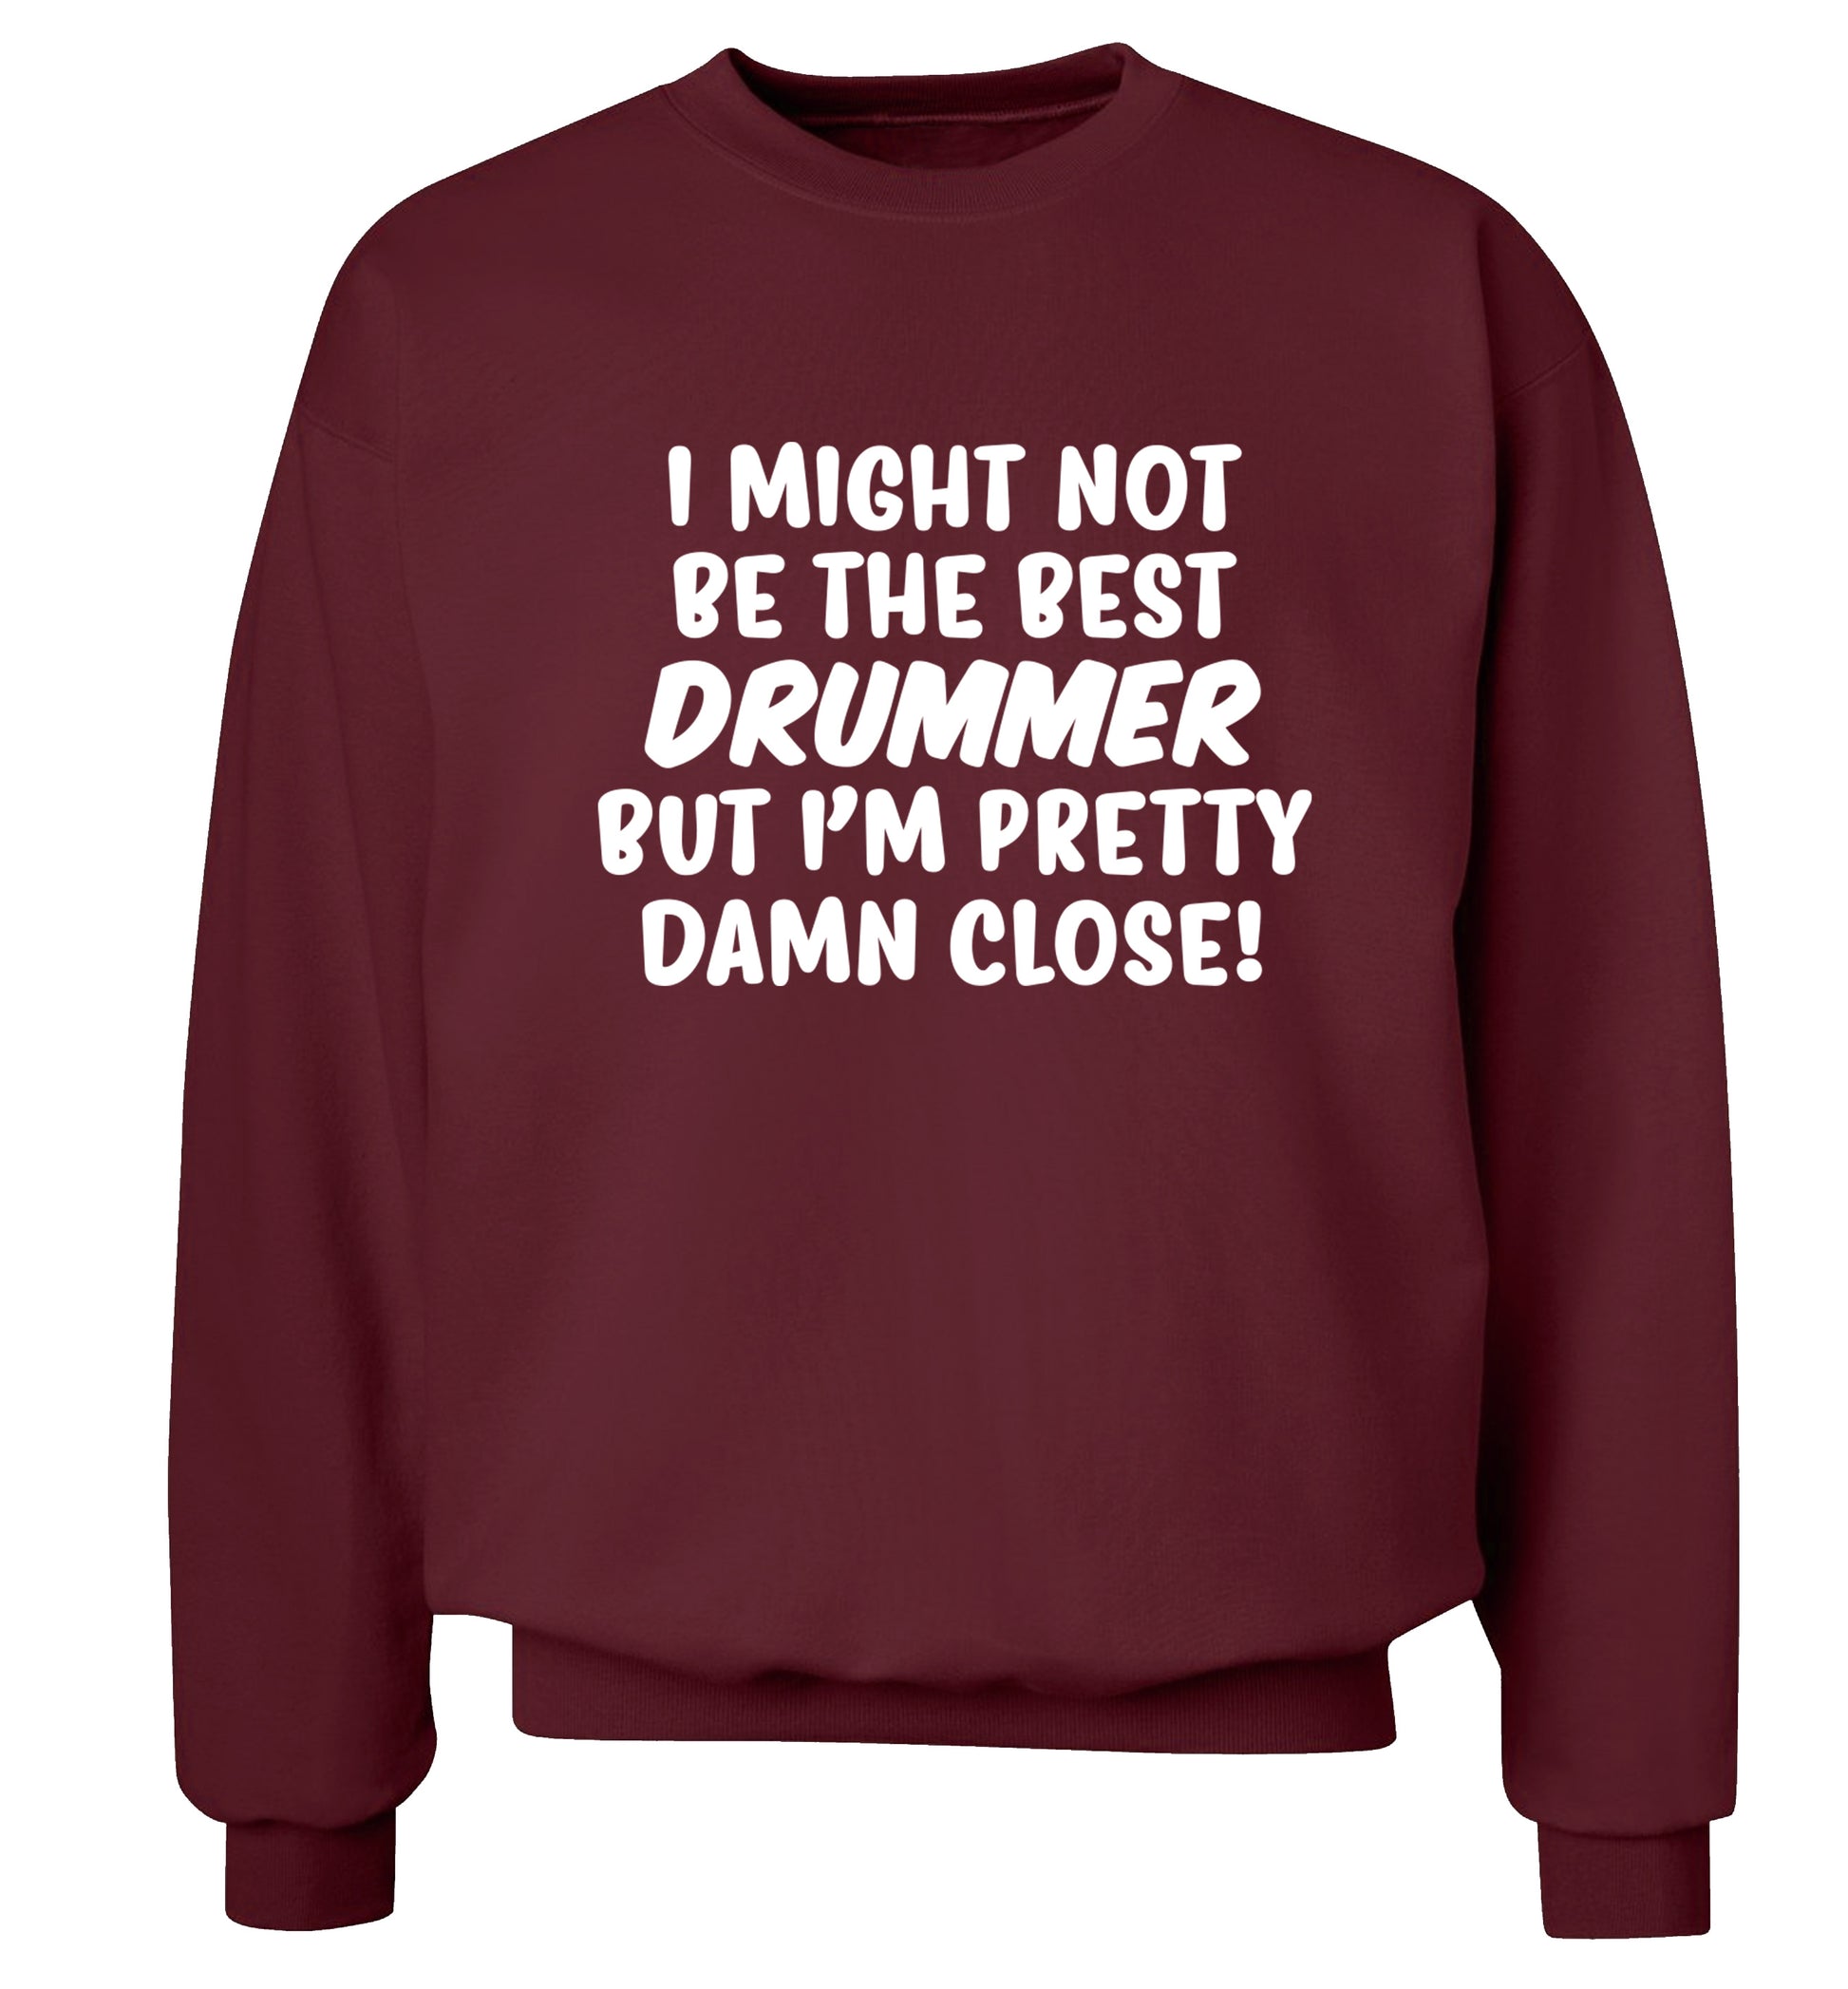 I might not be the best drummer but I'm pretty close! Adult's unisexmaroon Sweater 2XL